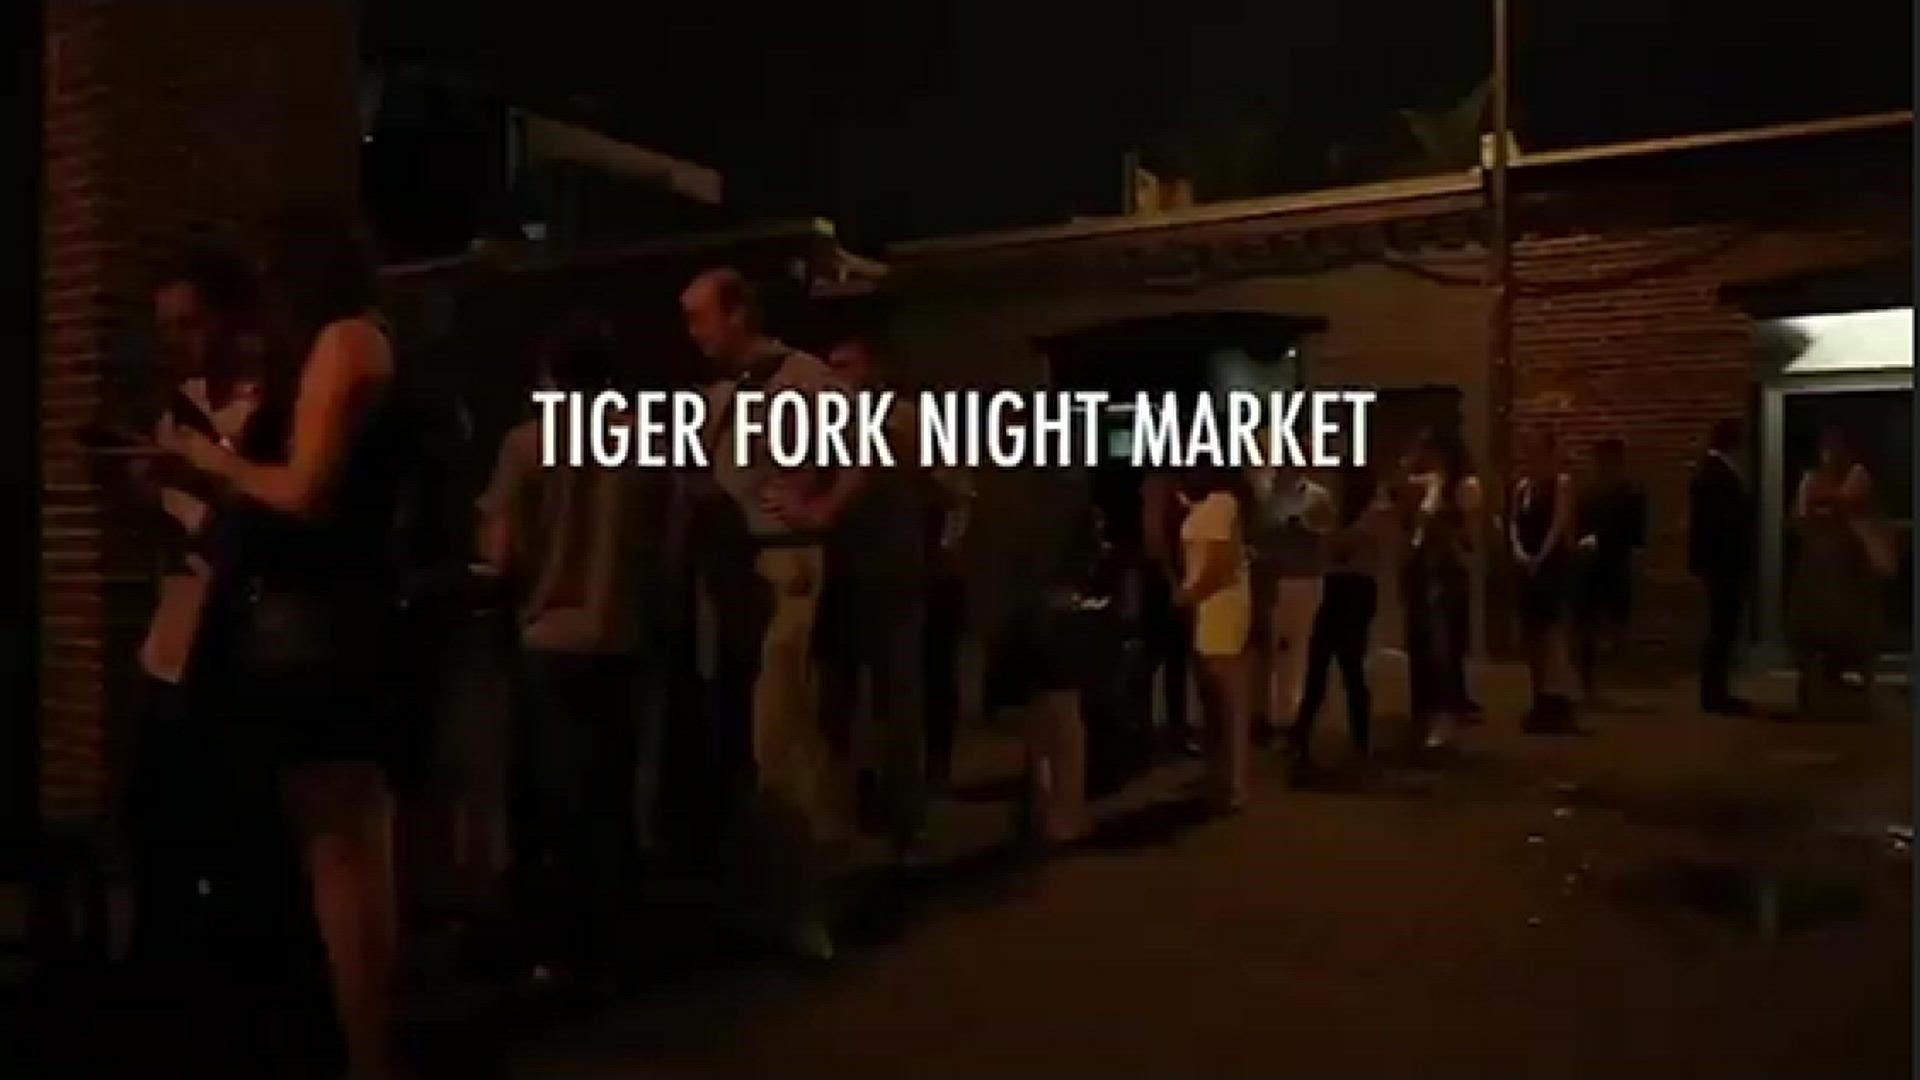 After a pandemic hiatus, Tiger Fork's Night Market event returns Thursday, transforming Blagden Alley in DC.